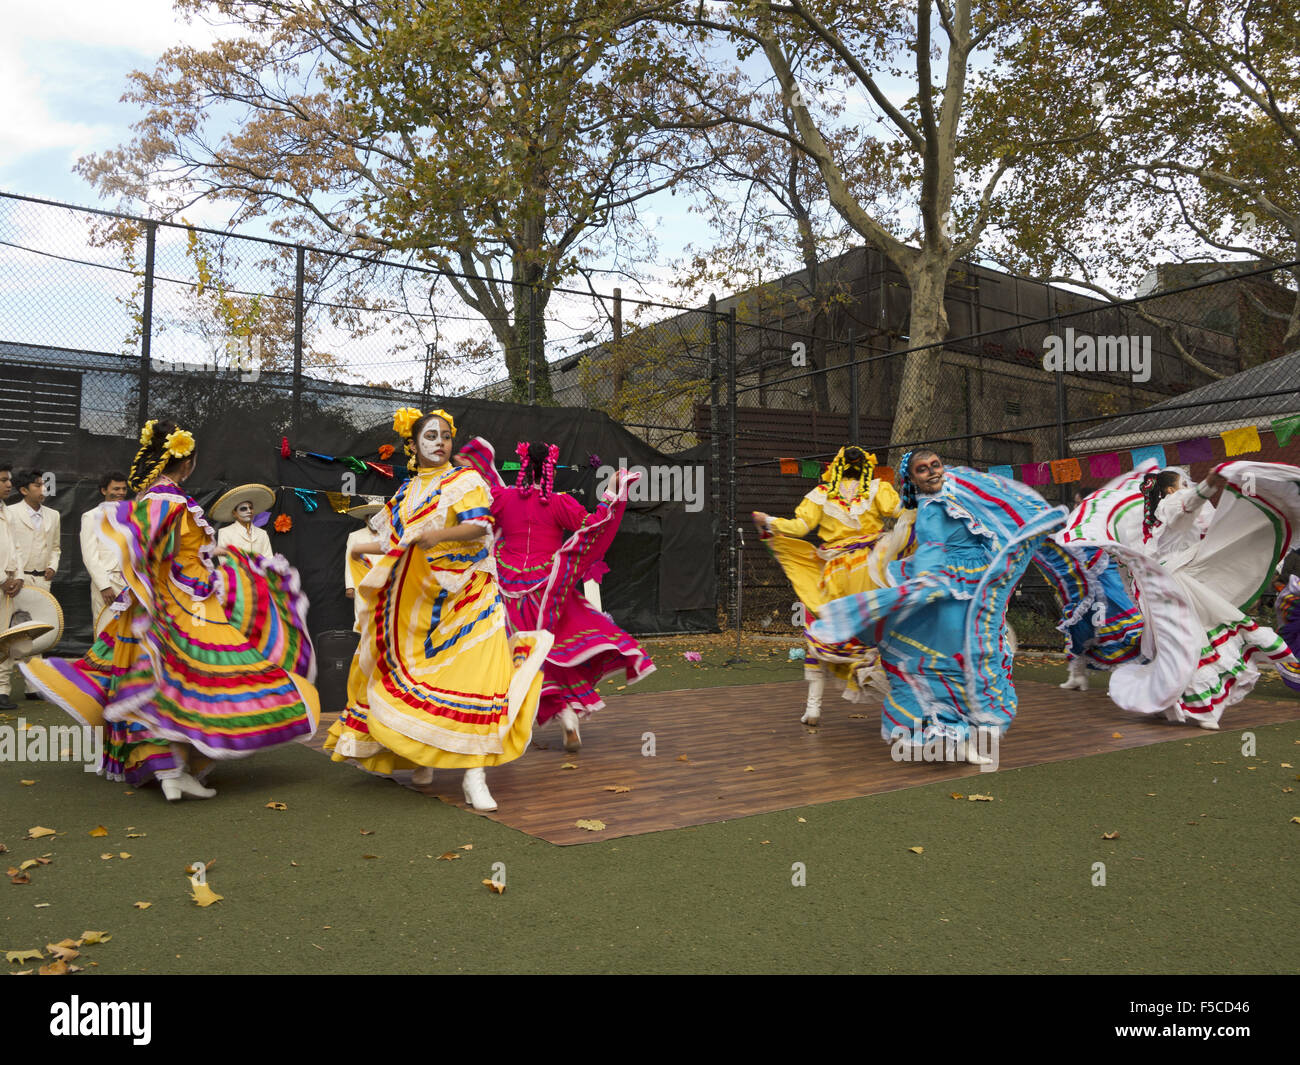 Folkloric dancers at Day of the Dead Festival in the Kensington section of Brooklyn, NY, Nov.1, 2015. Stock Photo